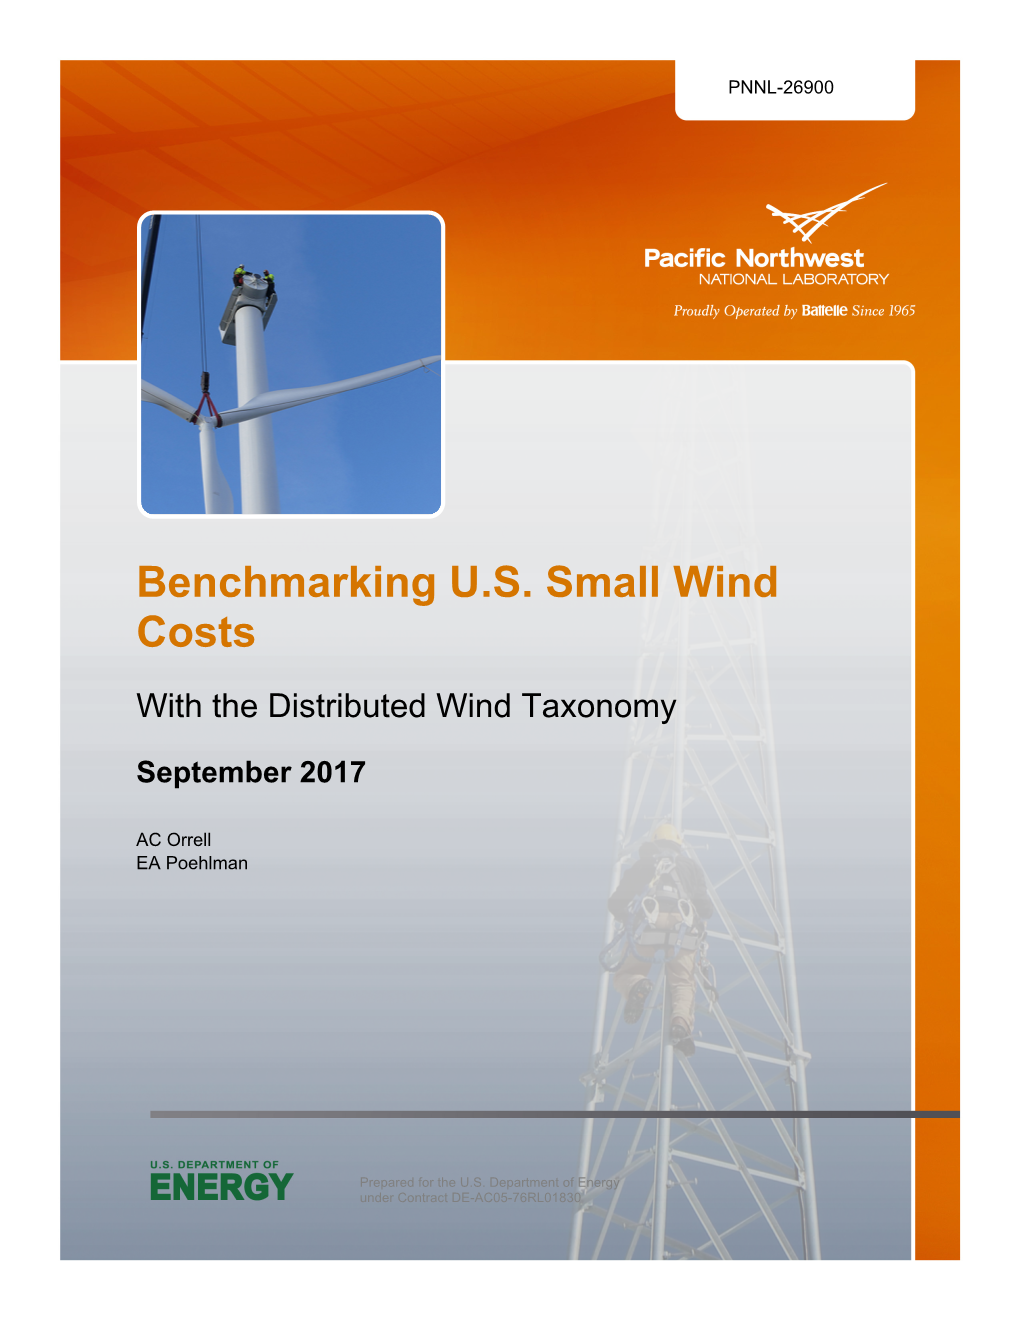 Benchmarking U.S. Small Wind Costs with the Distributed Wind Taxonomy